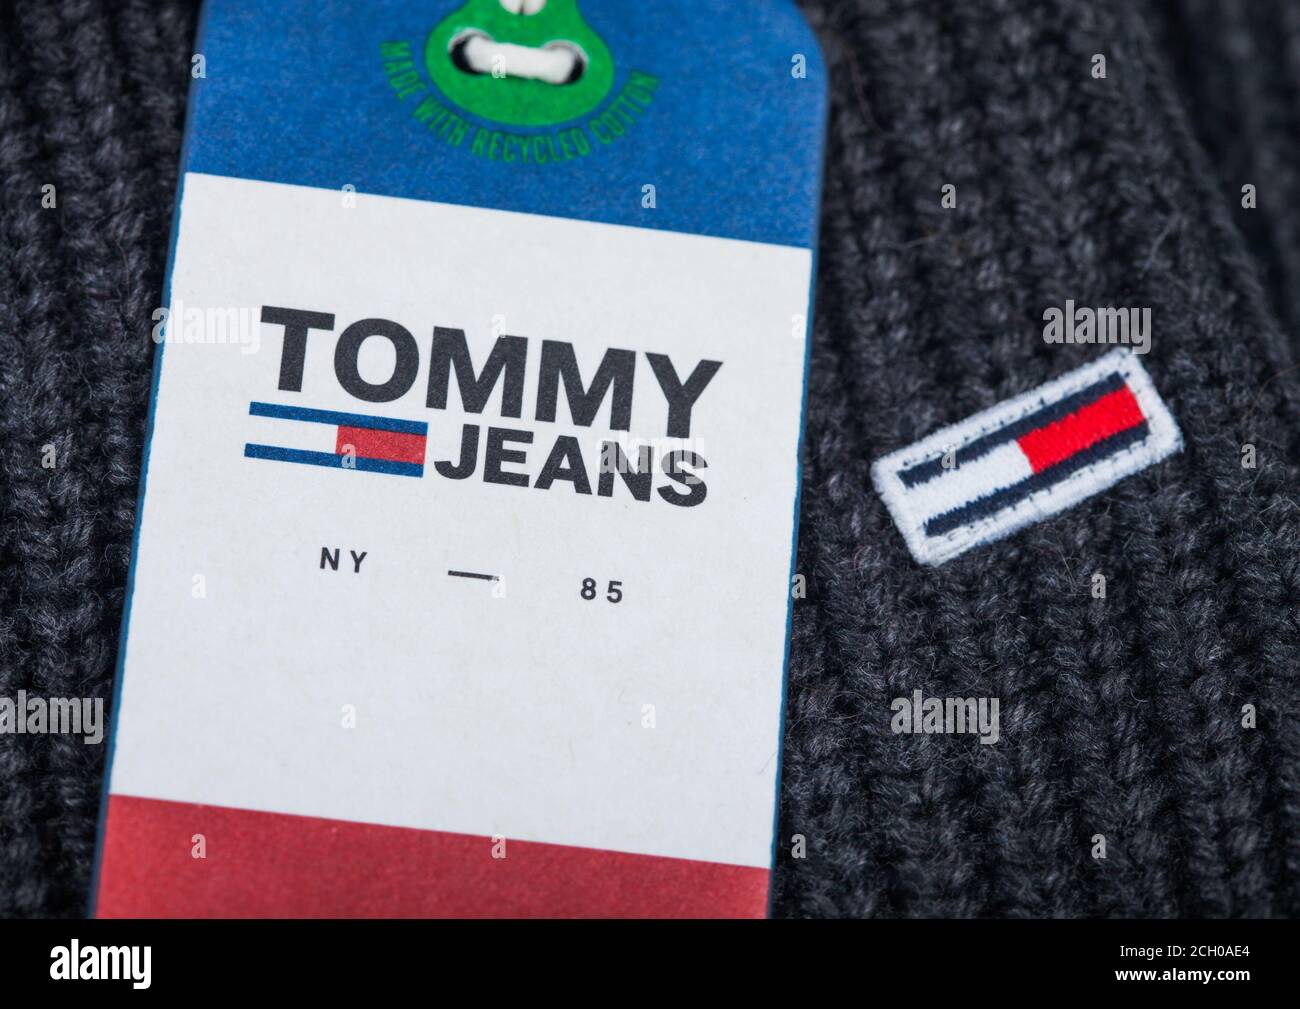 LONDON, UK - SEPTEMBER 09, 2020:Tommy Hilfiger logo and clothing tag on  grey wool fabric Stock Photo - Alamy